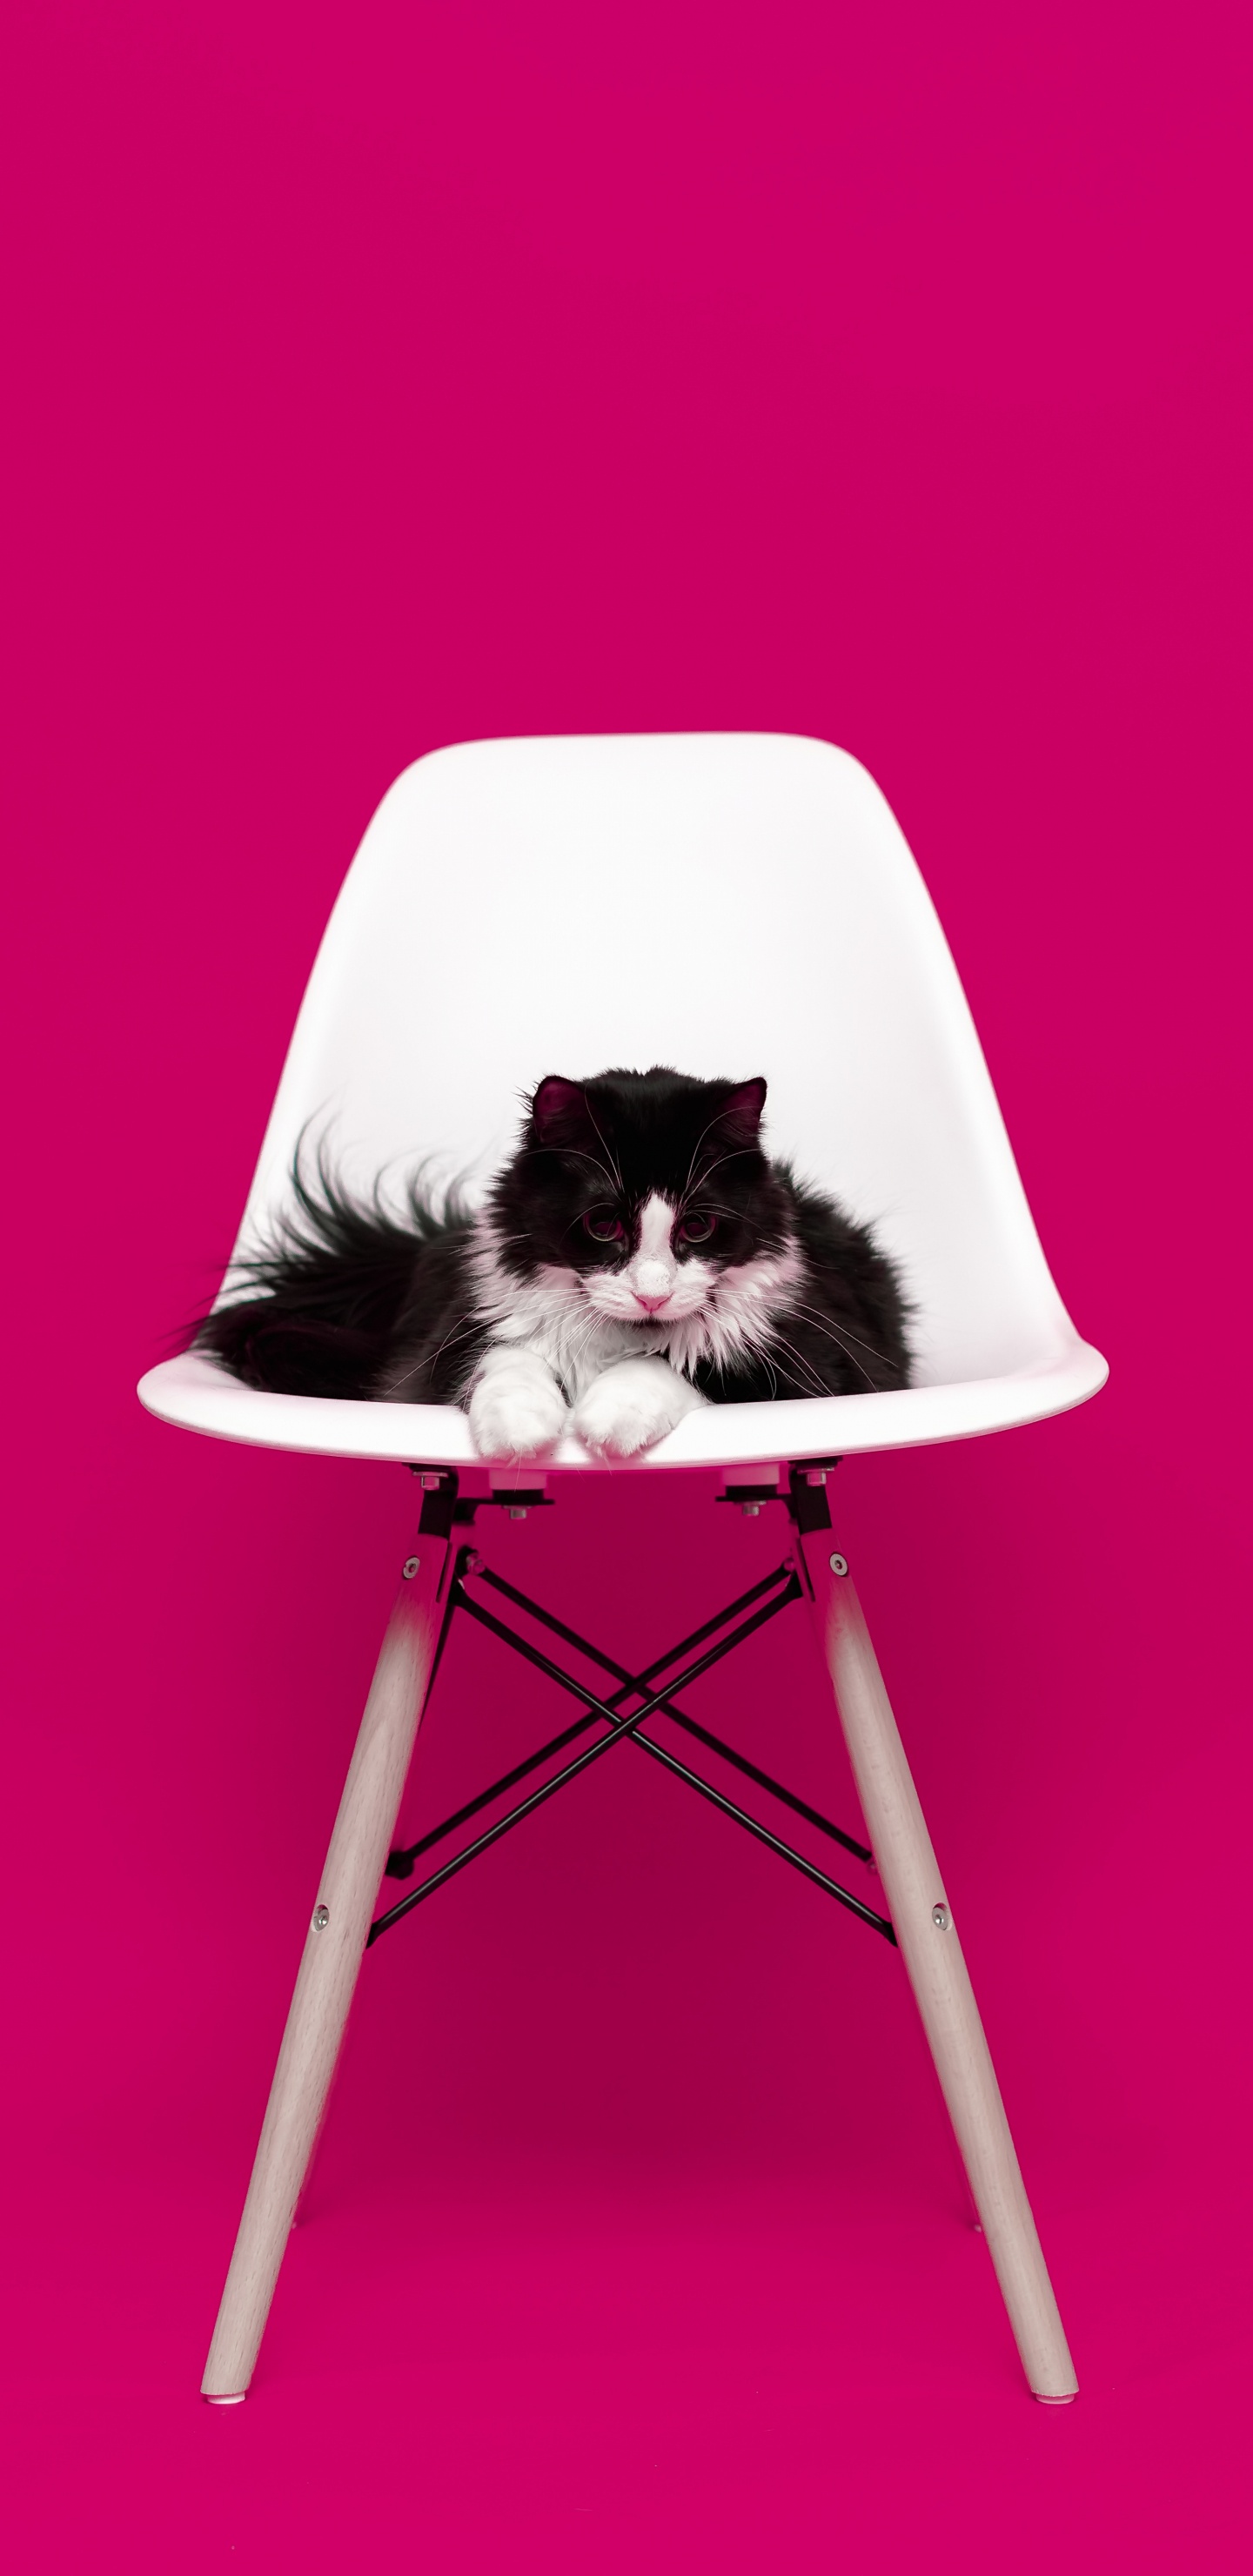 Black and White Cat on White Chair. Wallpaper in 1440x2960 Resolution